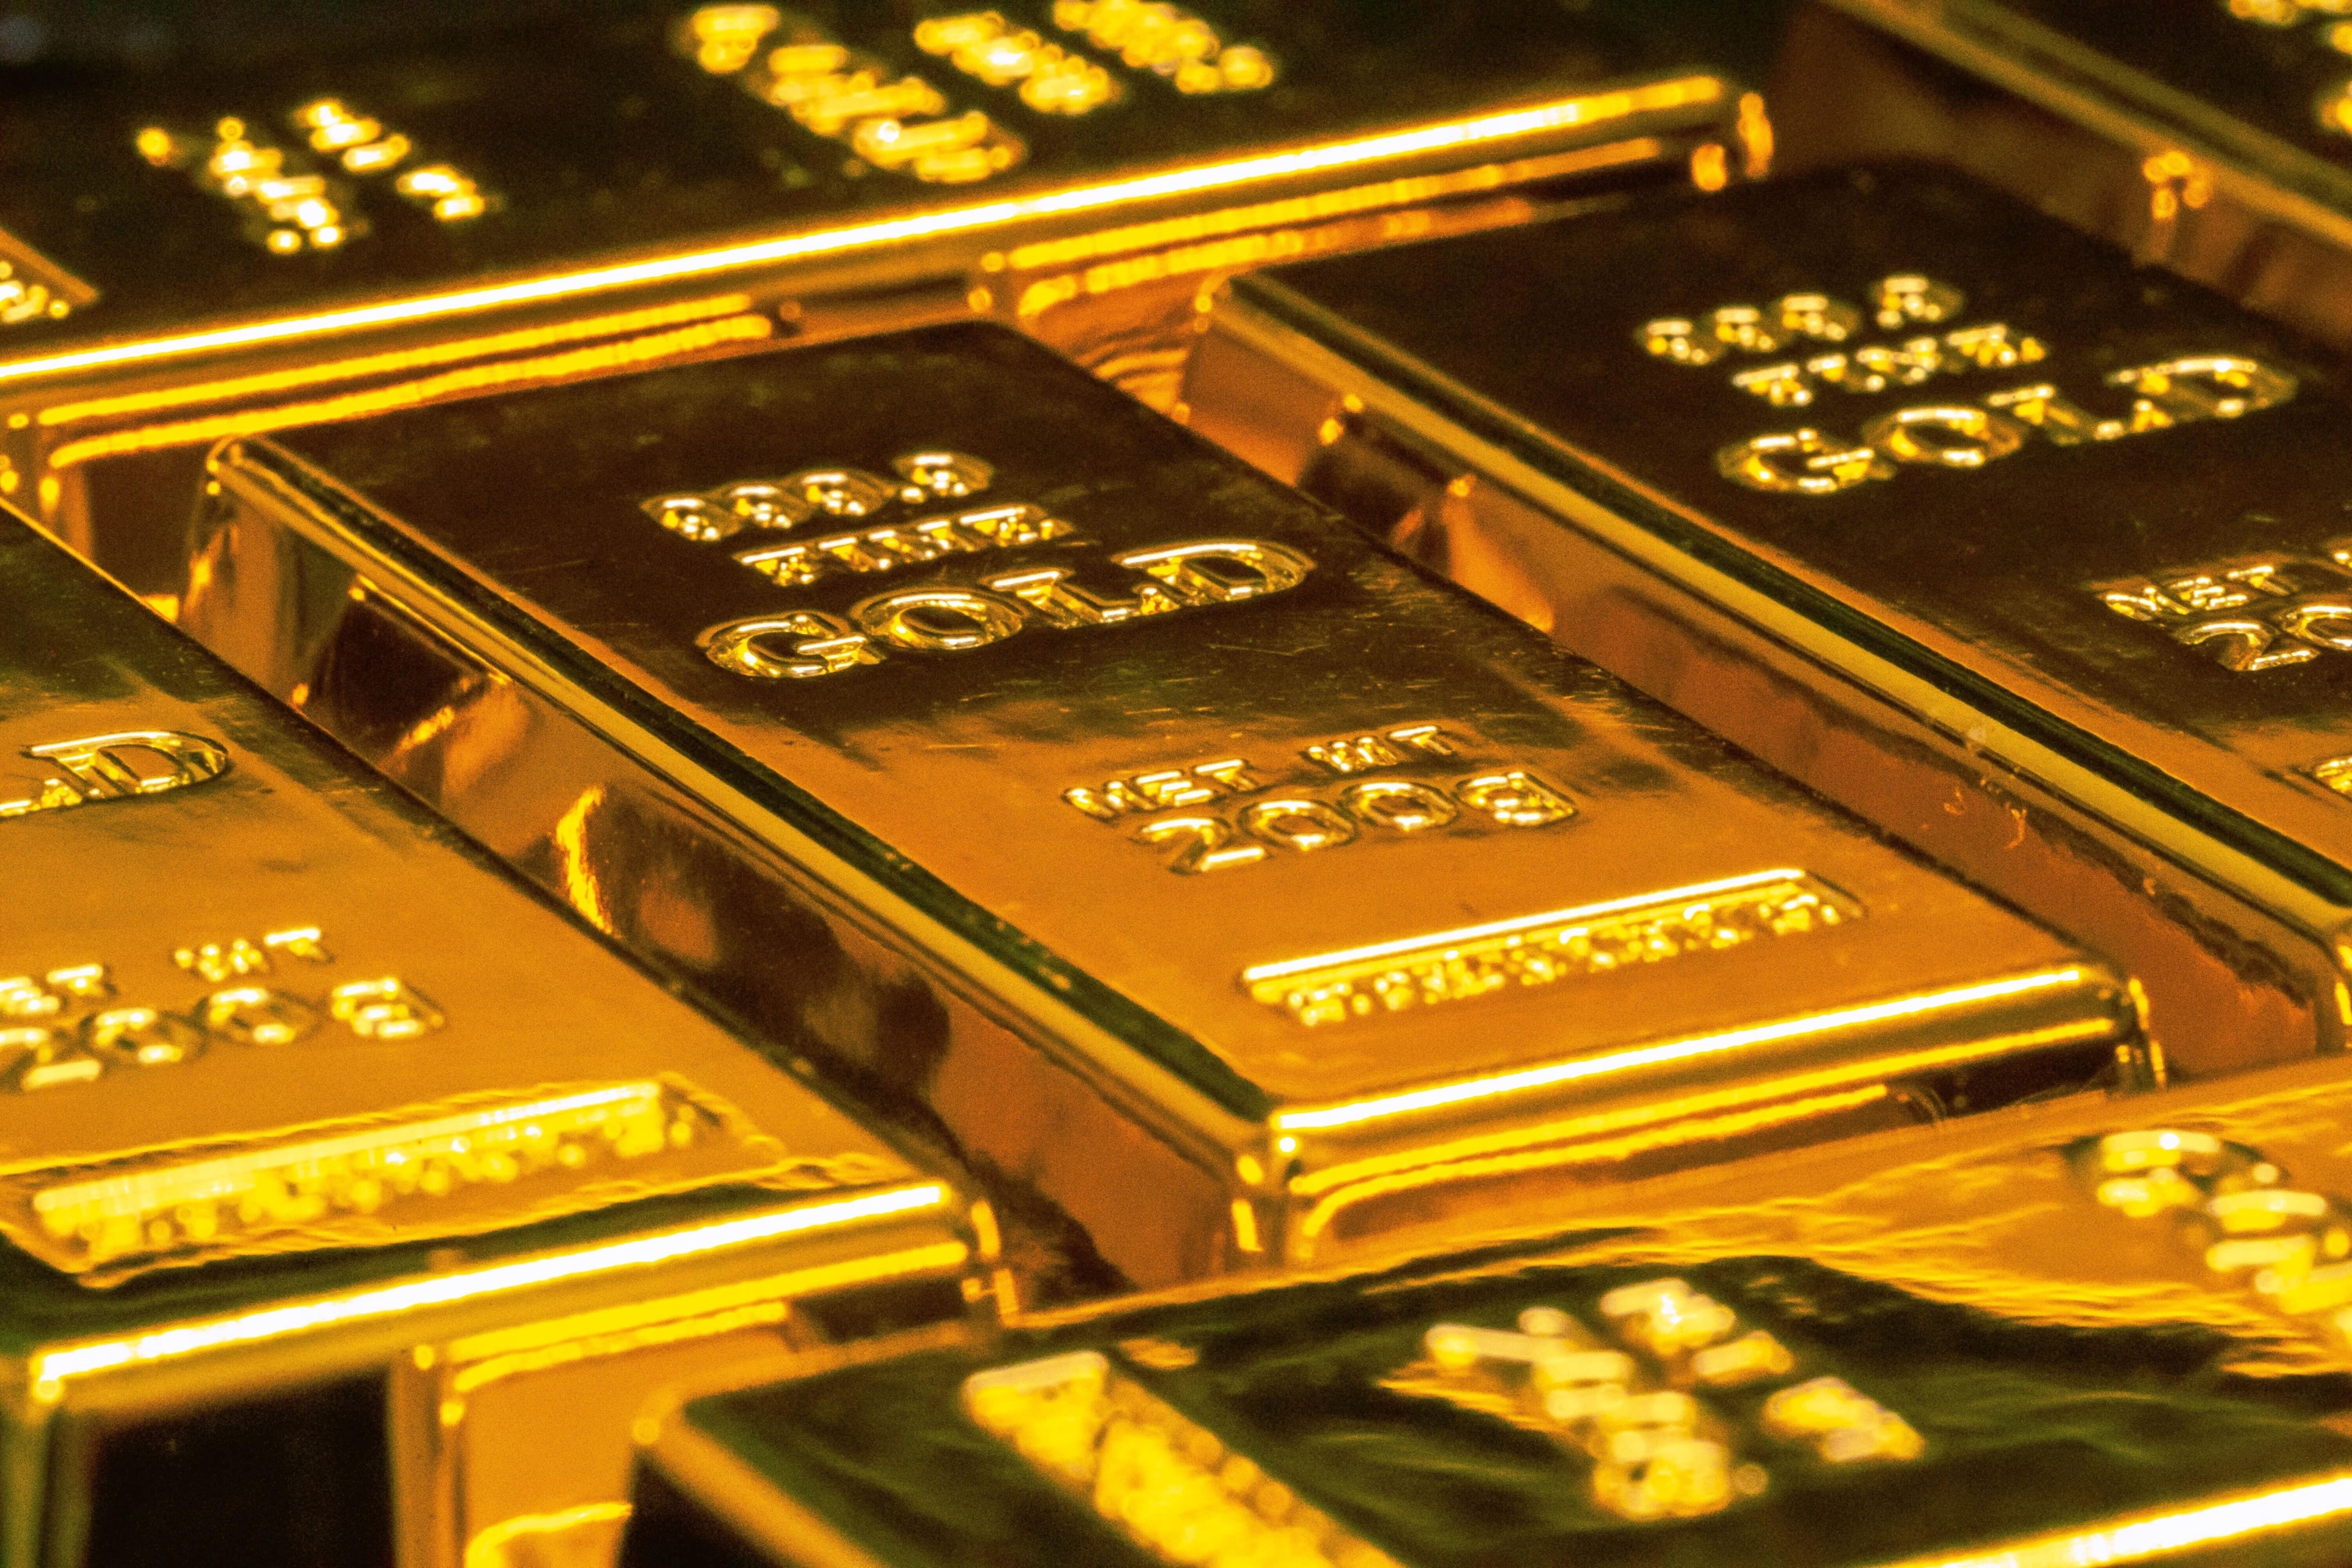 Gold was unchanged on March 21, trading near a two-week low it hit last week, as investors eyed developments in the Russia-Ukraine conflict. On March 18, gold and silver were on a weaker note in the international markets. Gold April futures contract settled at $1,921.55 per troy ounce, down by 1.11 percent and silver May futures contract settled at $25.13 per troy ounce, down by 1.90 percent.